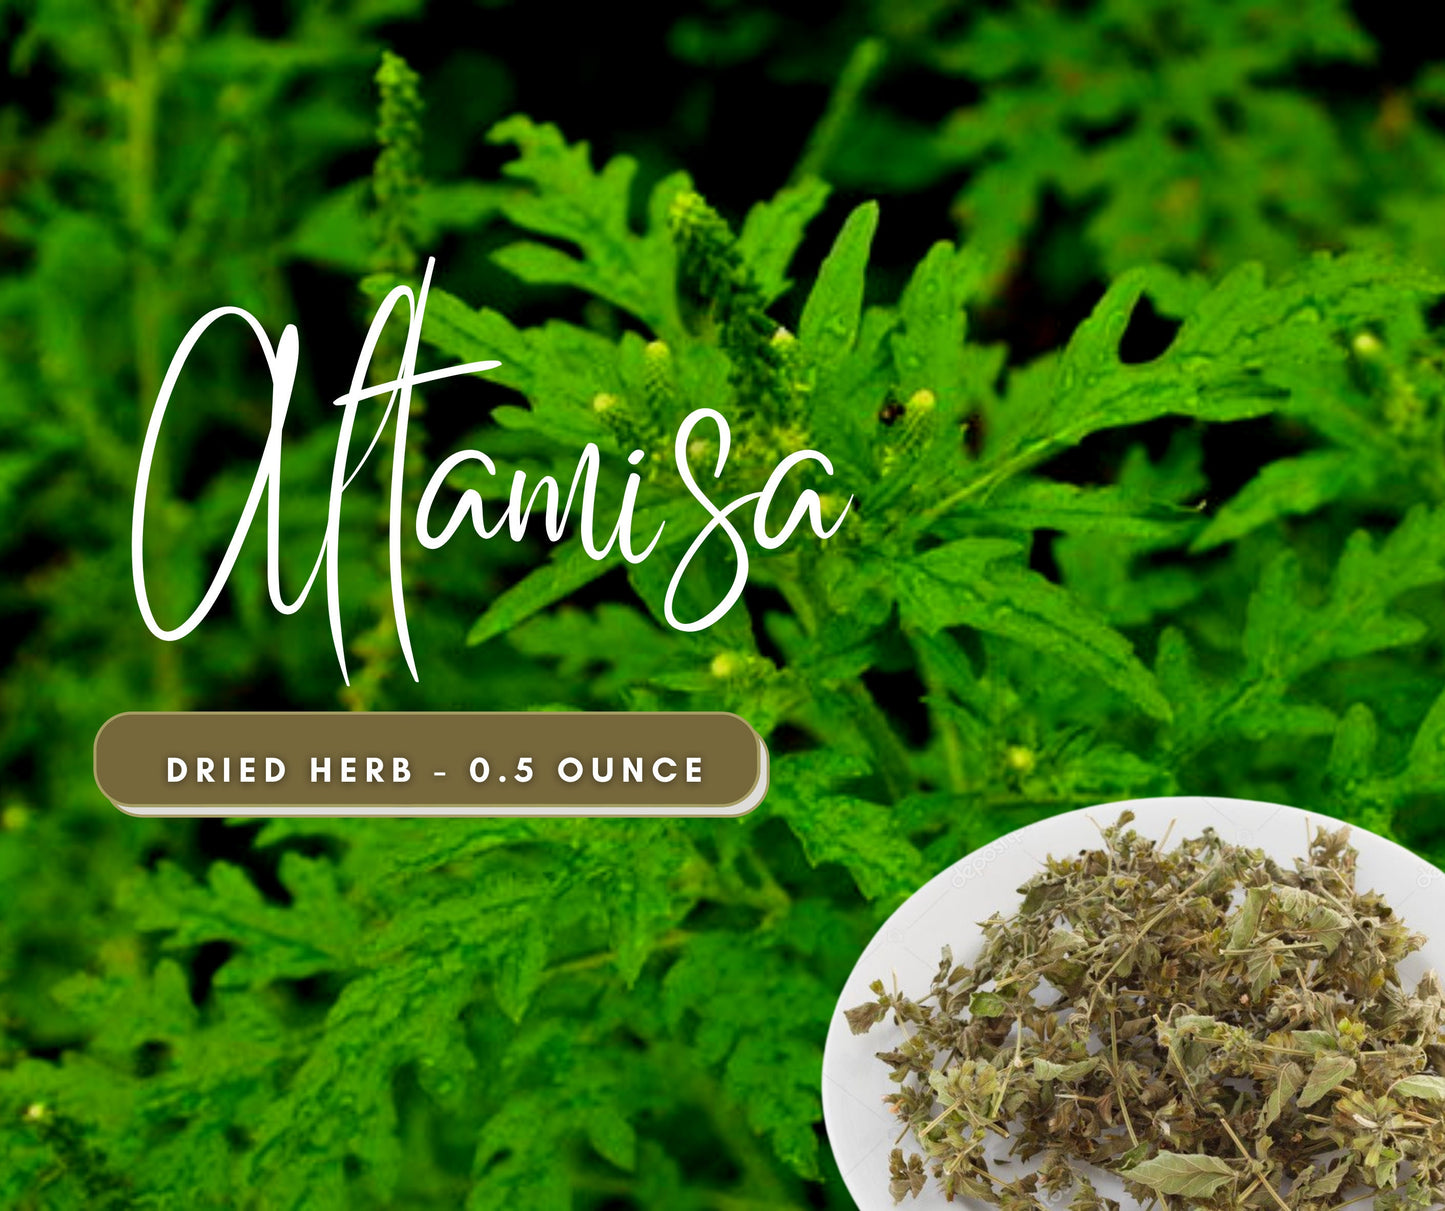 Altamisa LEGITIMATE Dried Herb - Remove Home Cleansing Herb - Boost Intuition - Use in Candles or Spiritual Bath - Natural Cleansing Herb